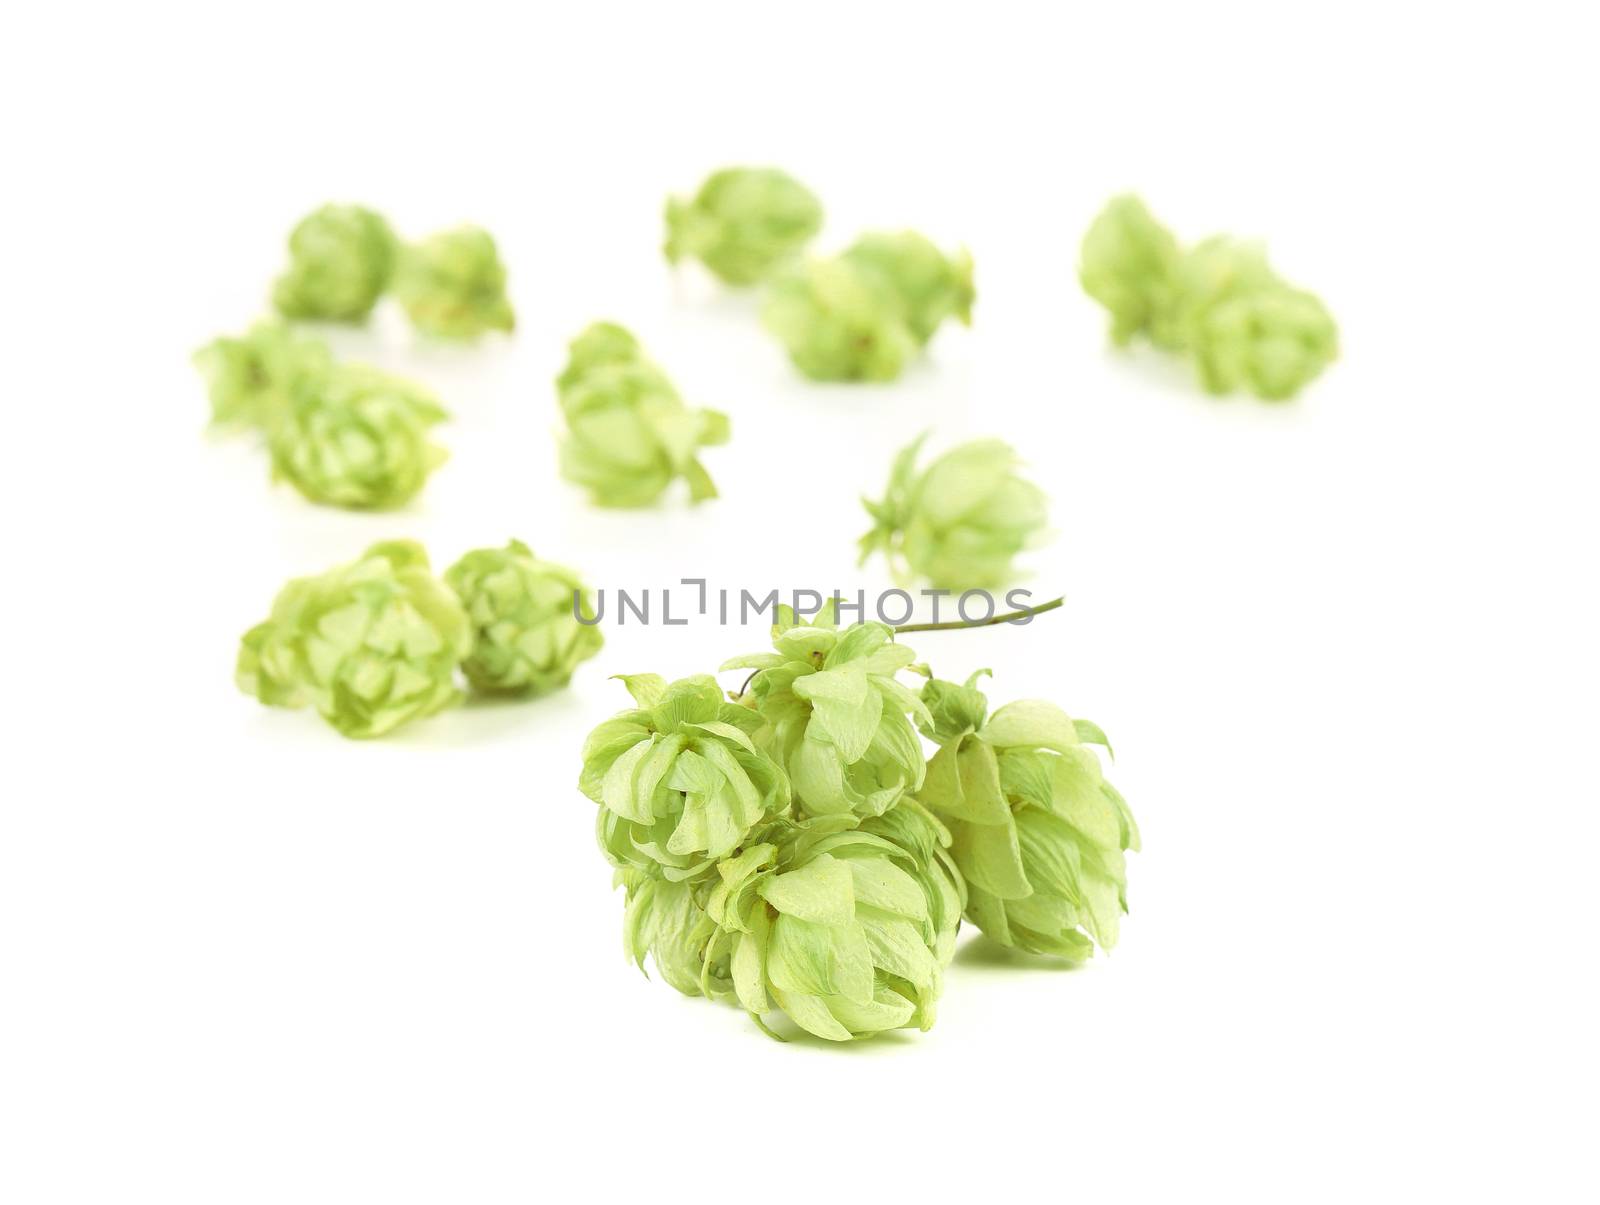 Heaps of hop. Isolated on a white background.